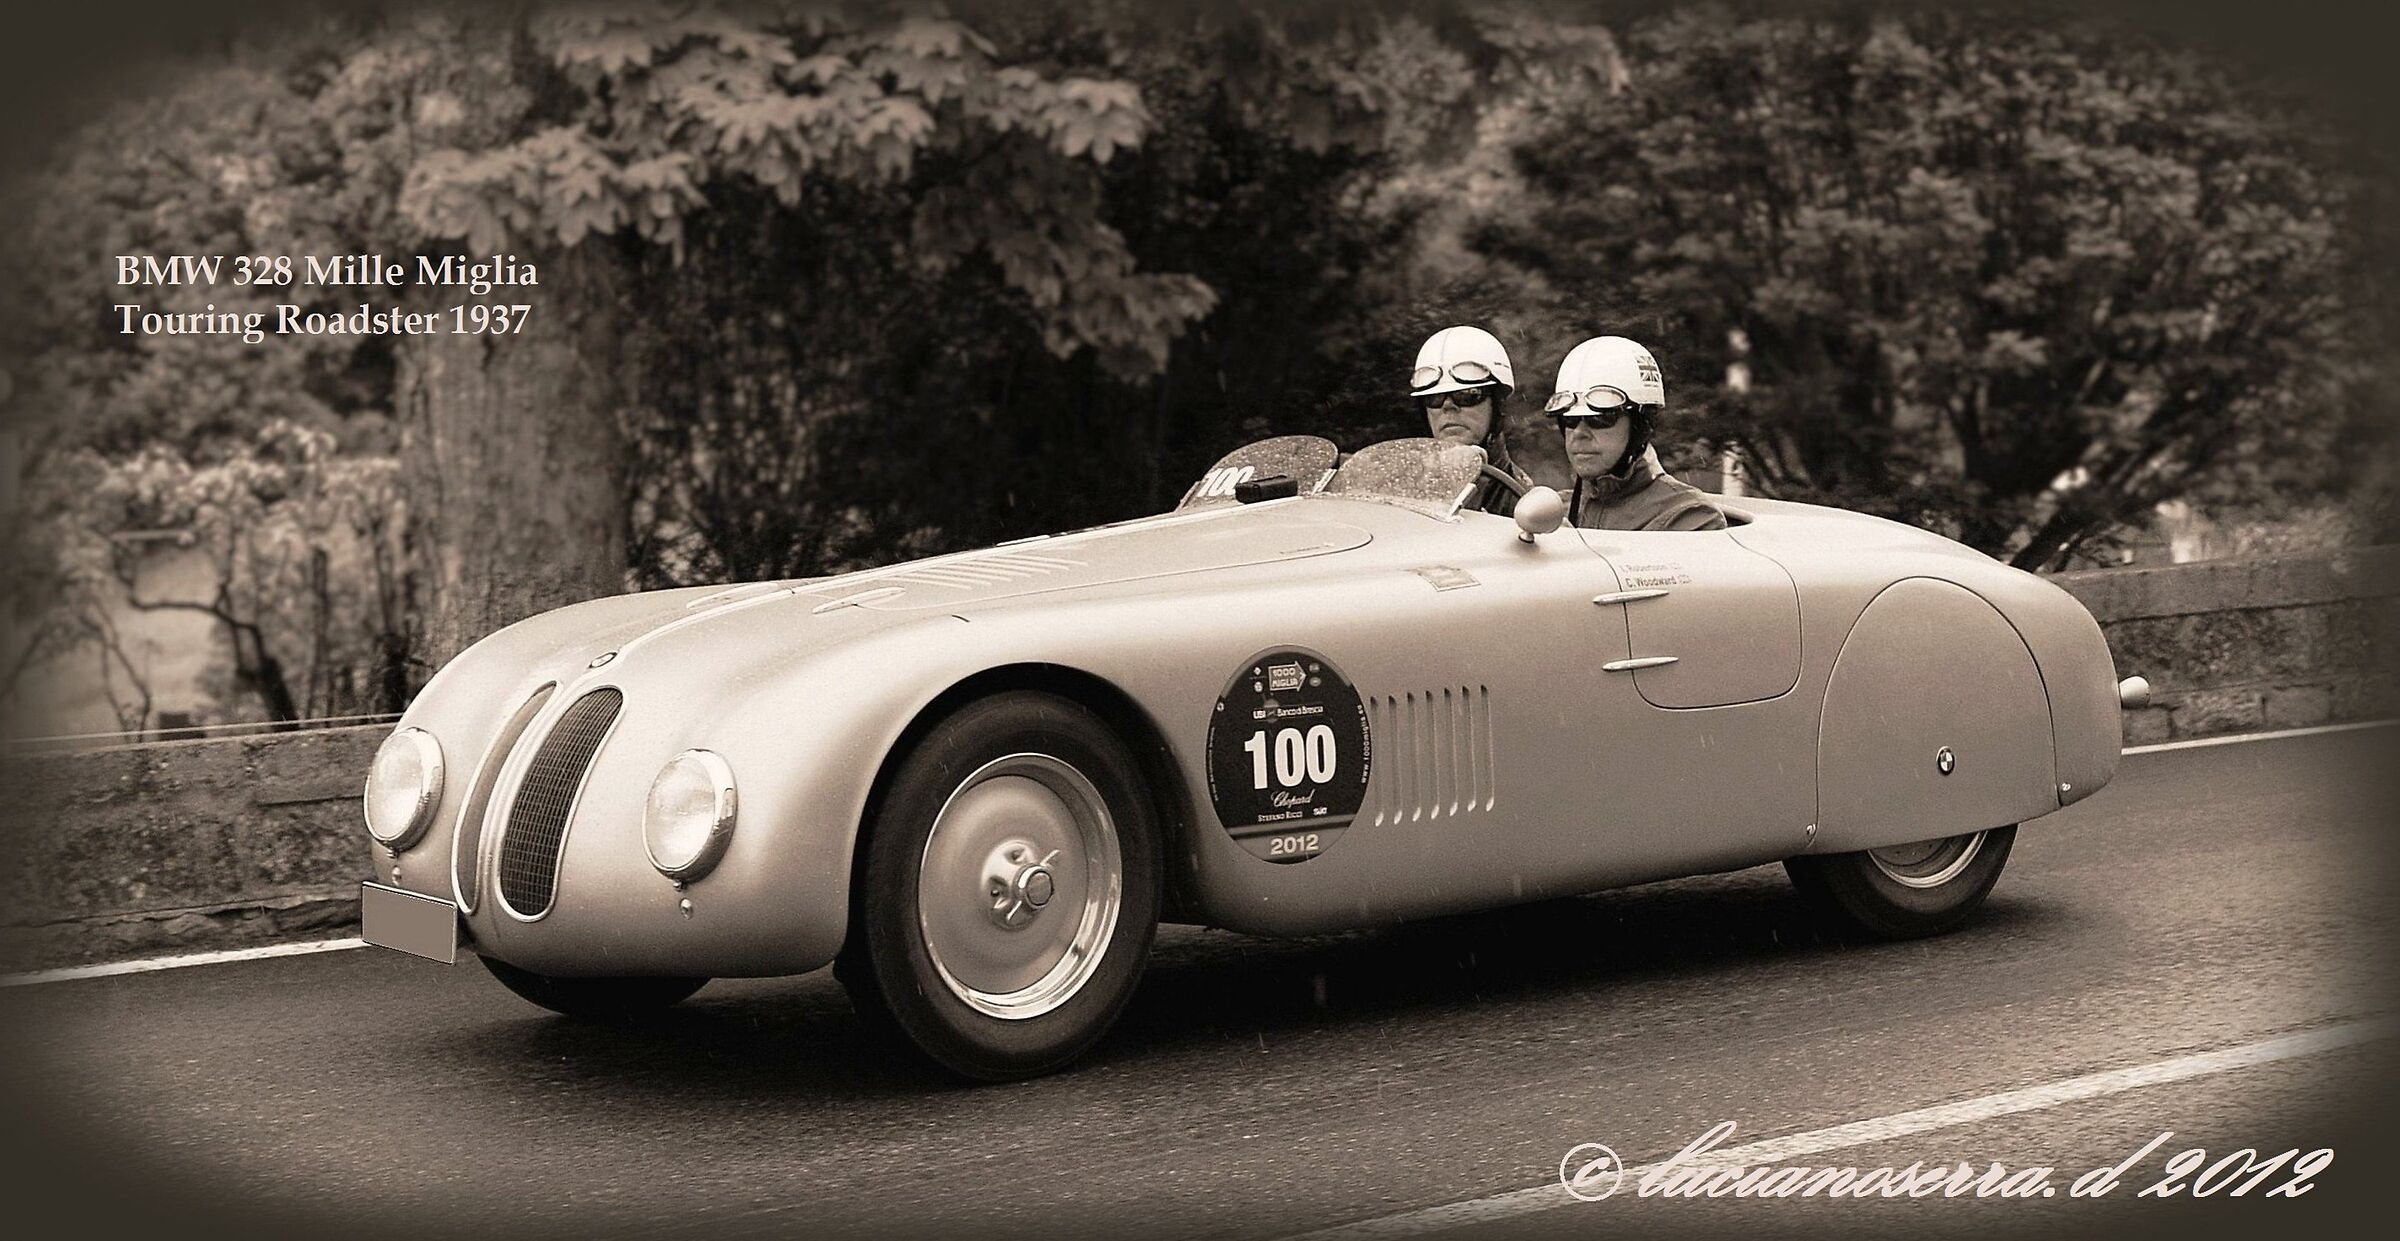 BMW 328 Mille Miglia Touring Roadster - 1937...